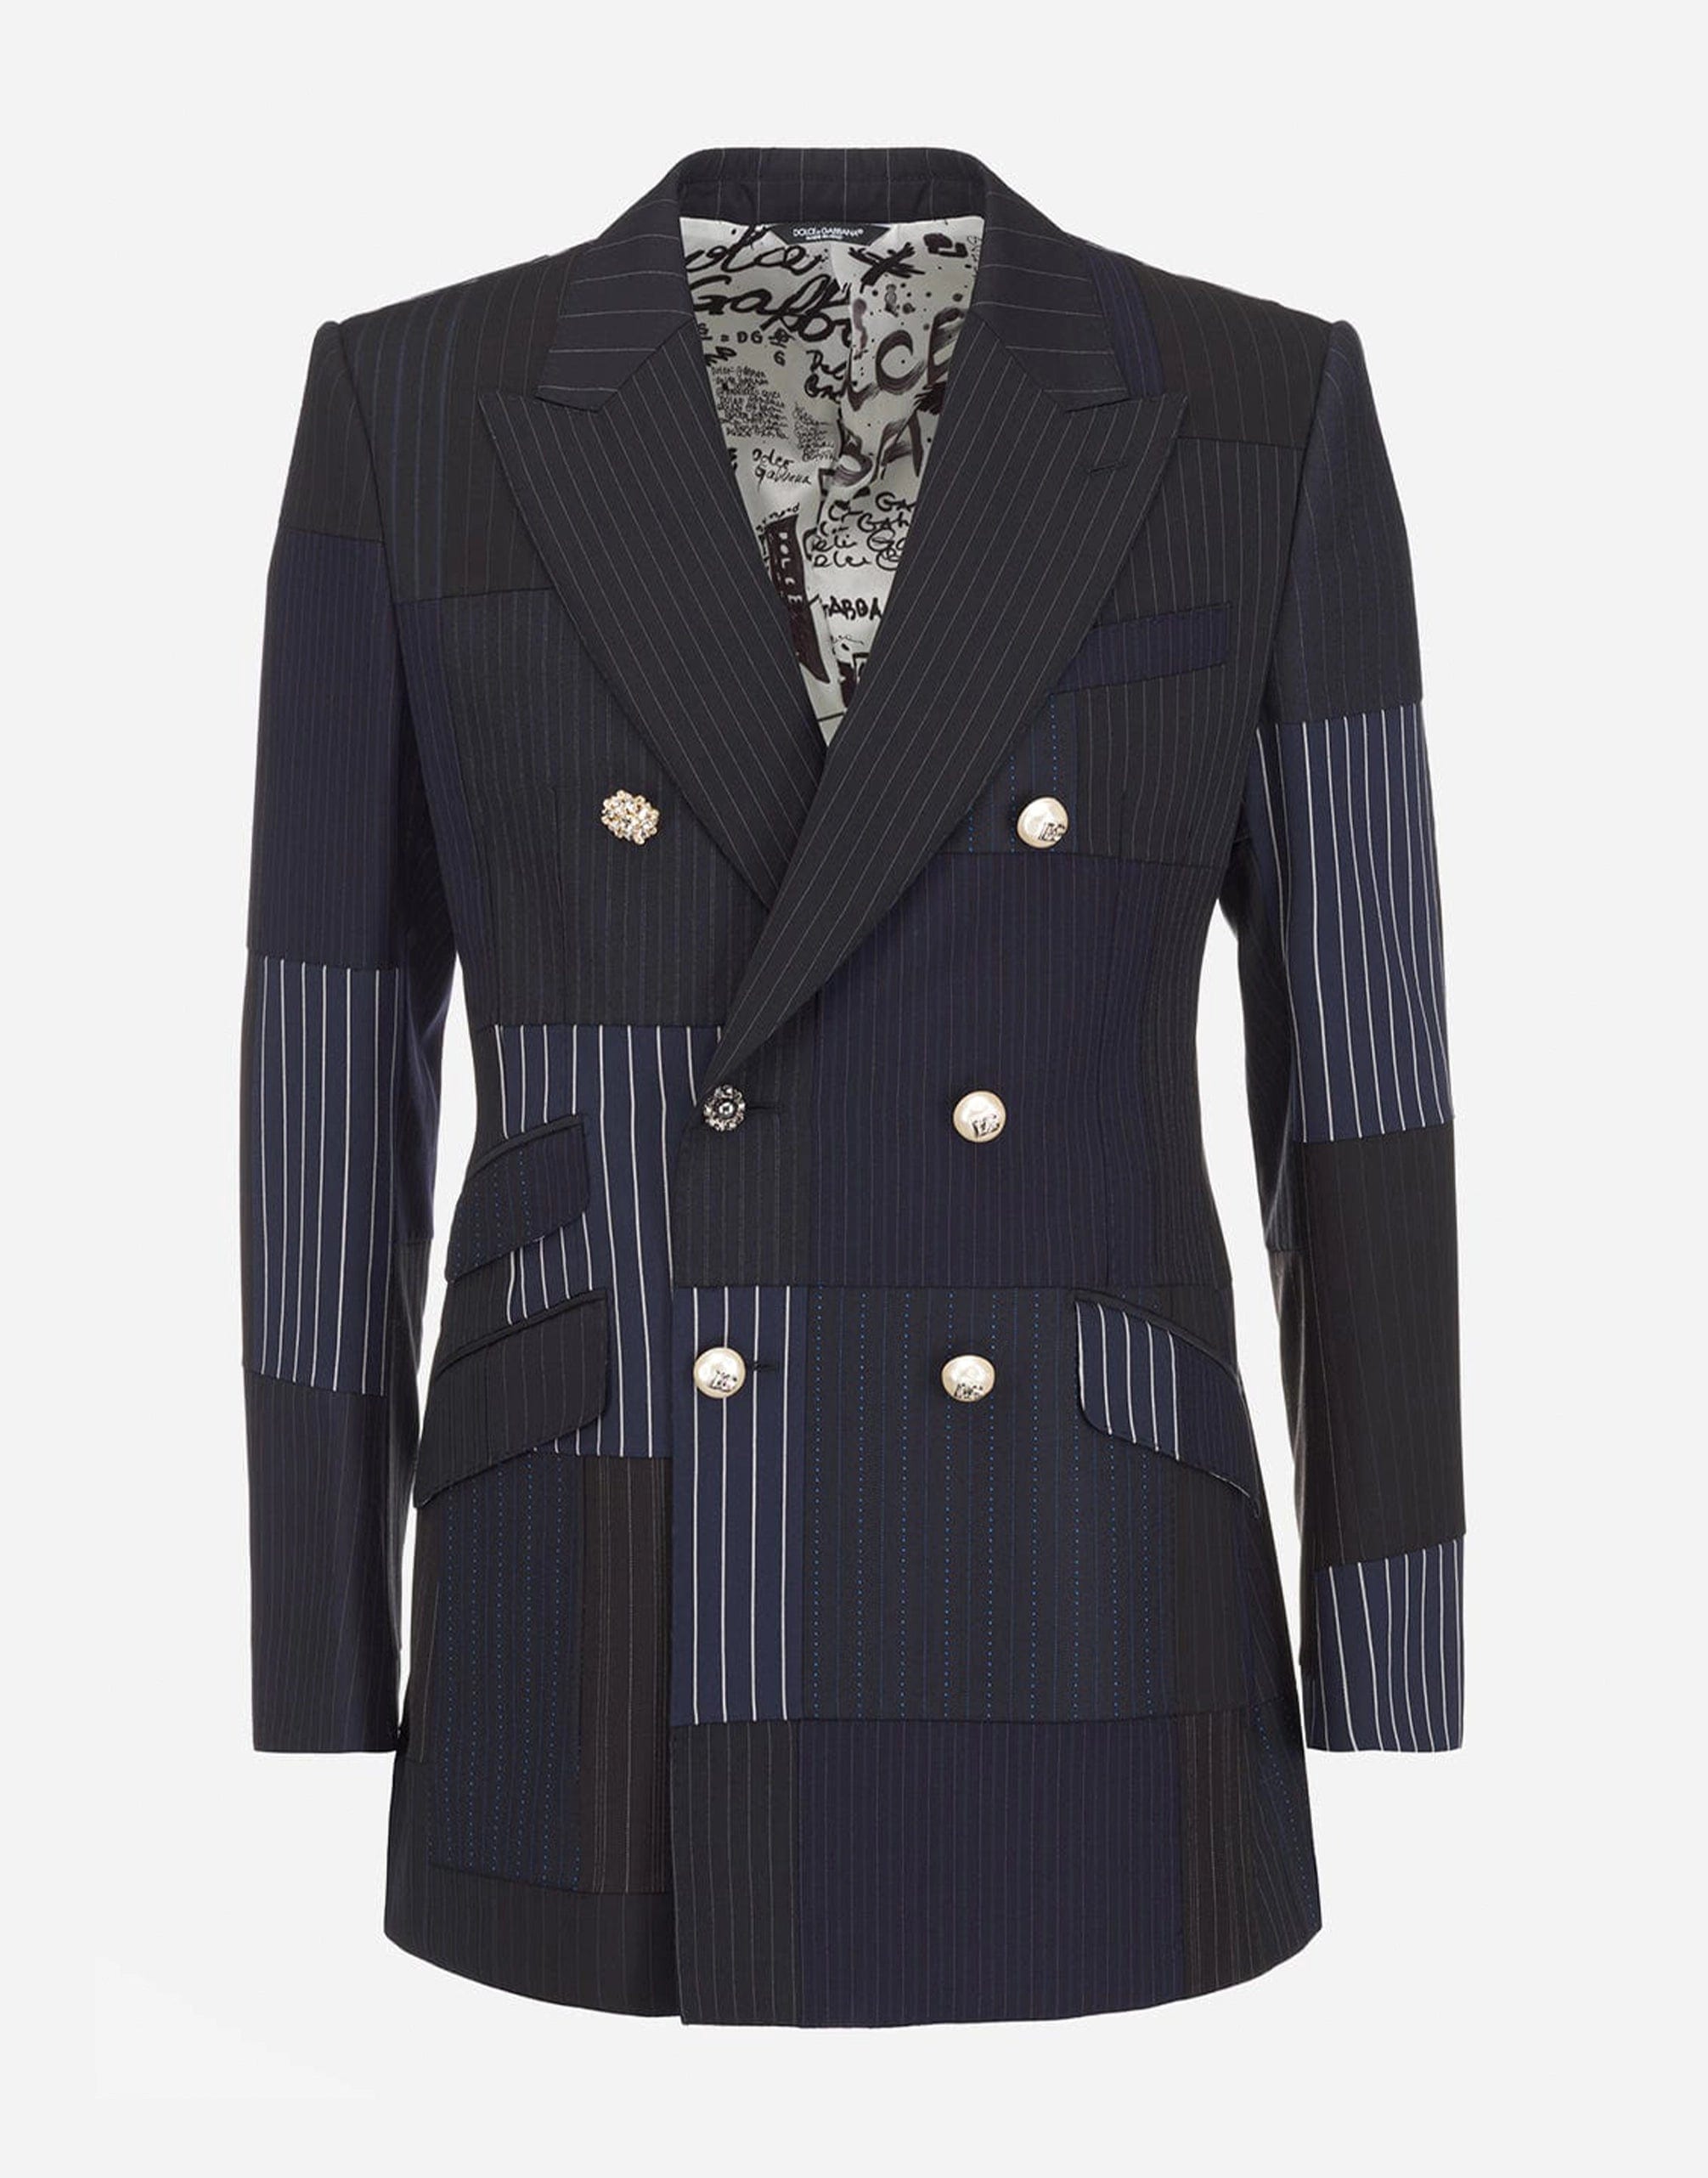 Dolce & Gabbana Double-Breasted Patchwork Suit Jacket